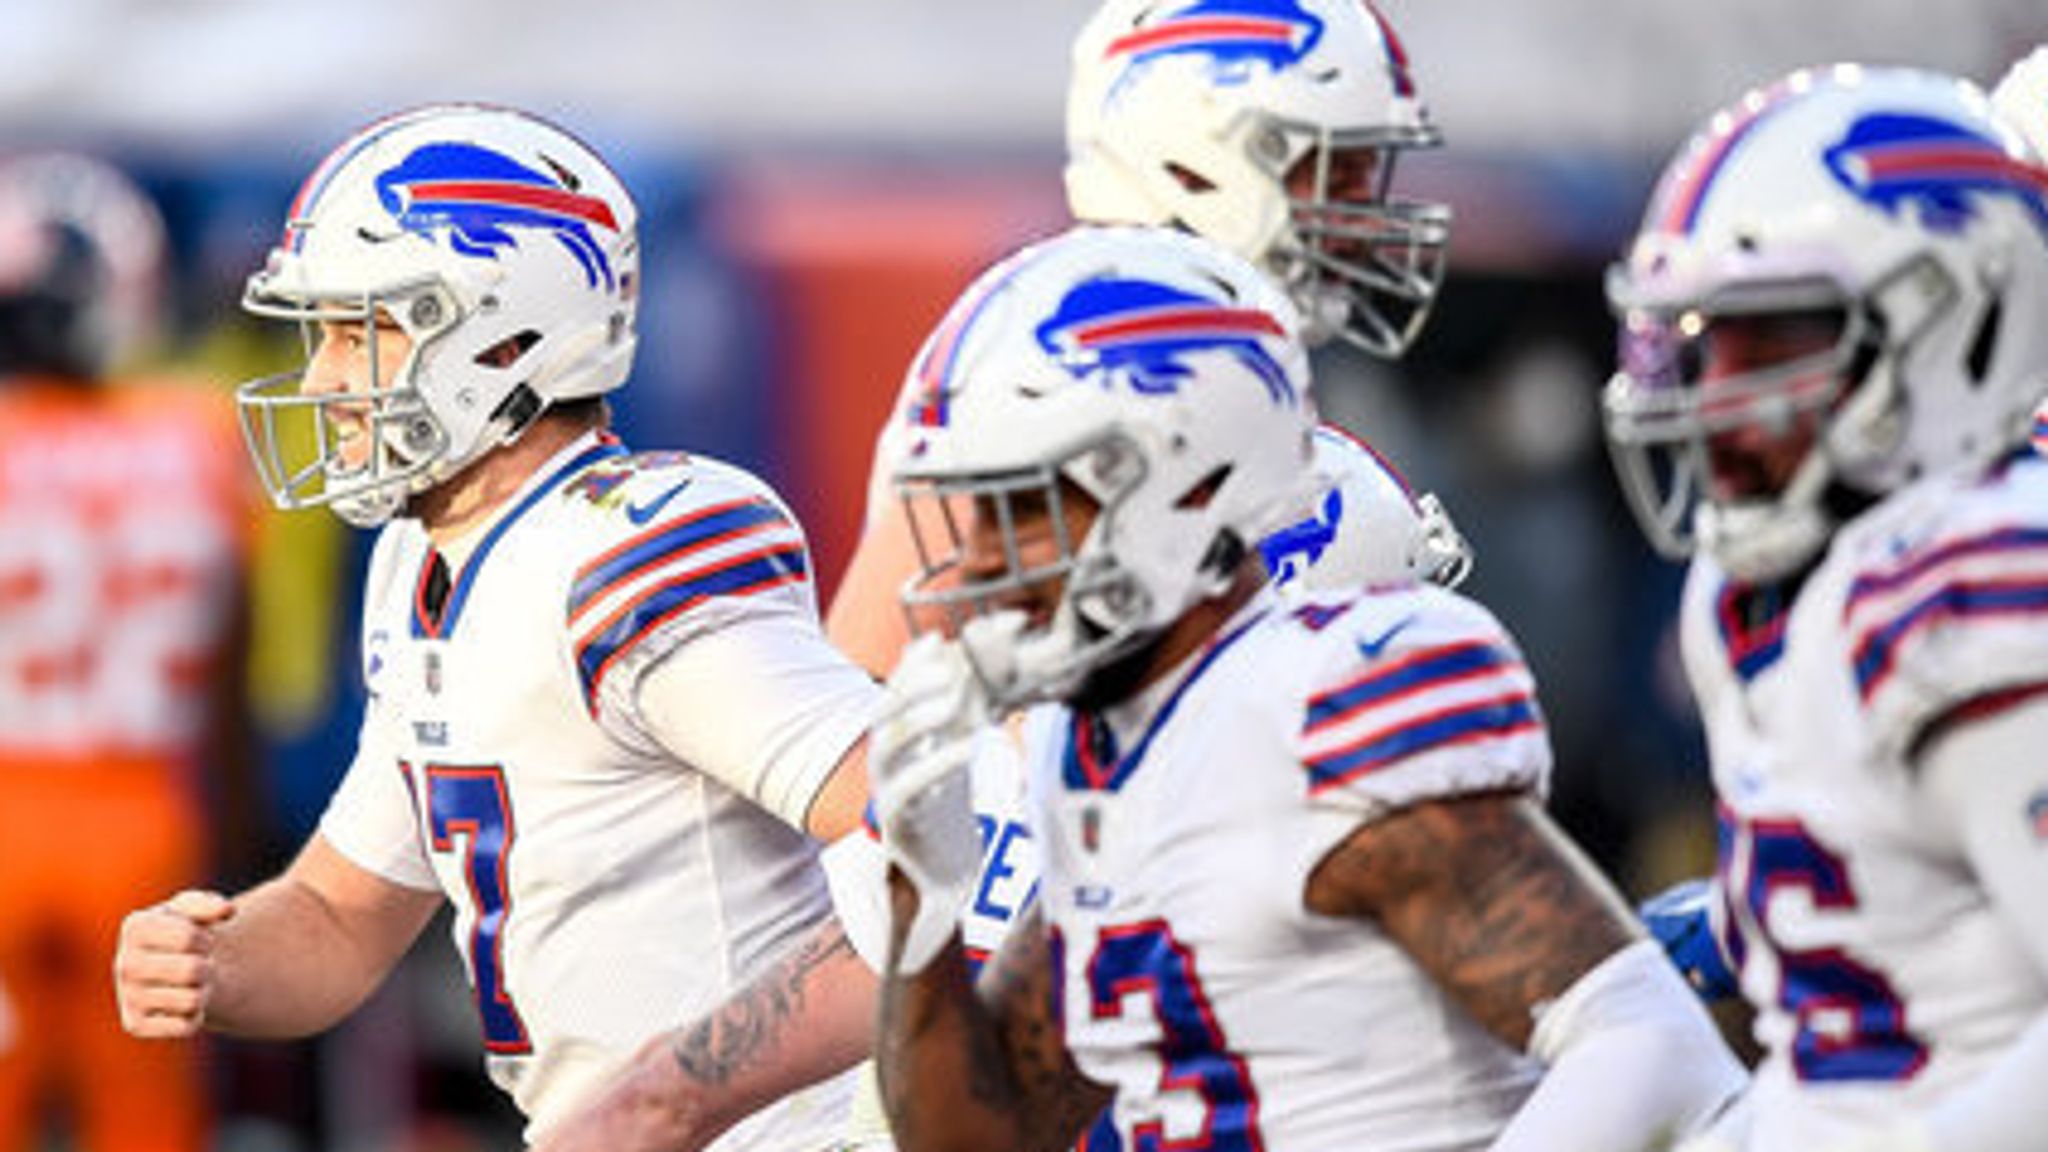 Buffalo Bills have over from New England Patriots as NFL team, says Brian Baldinger | NFL News | Sky Sports